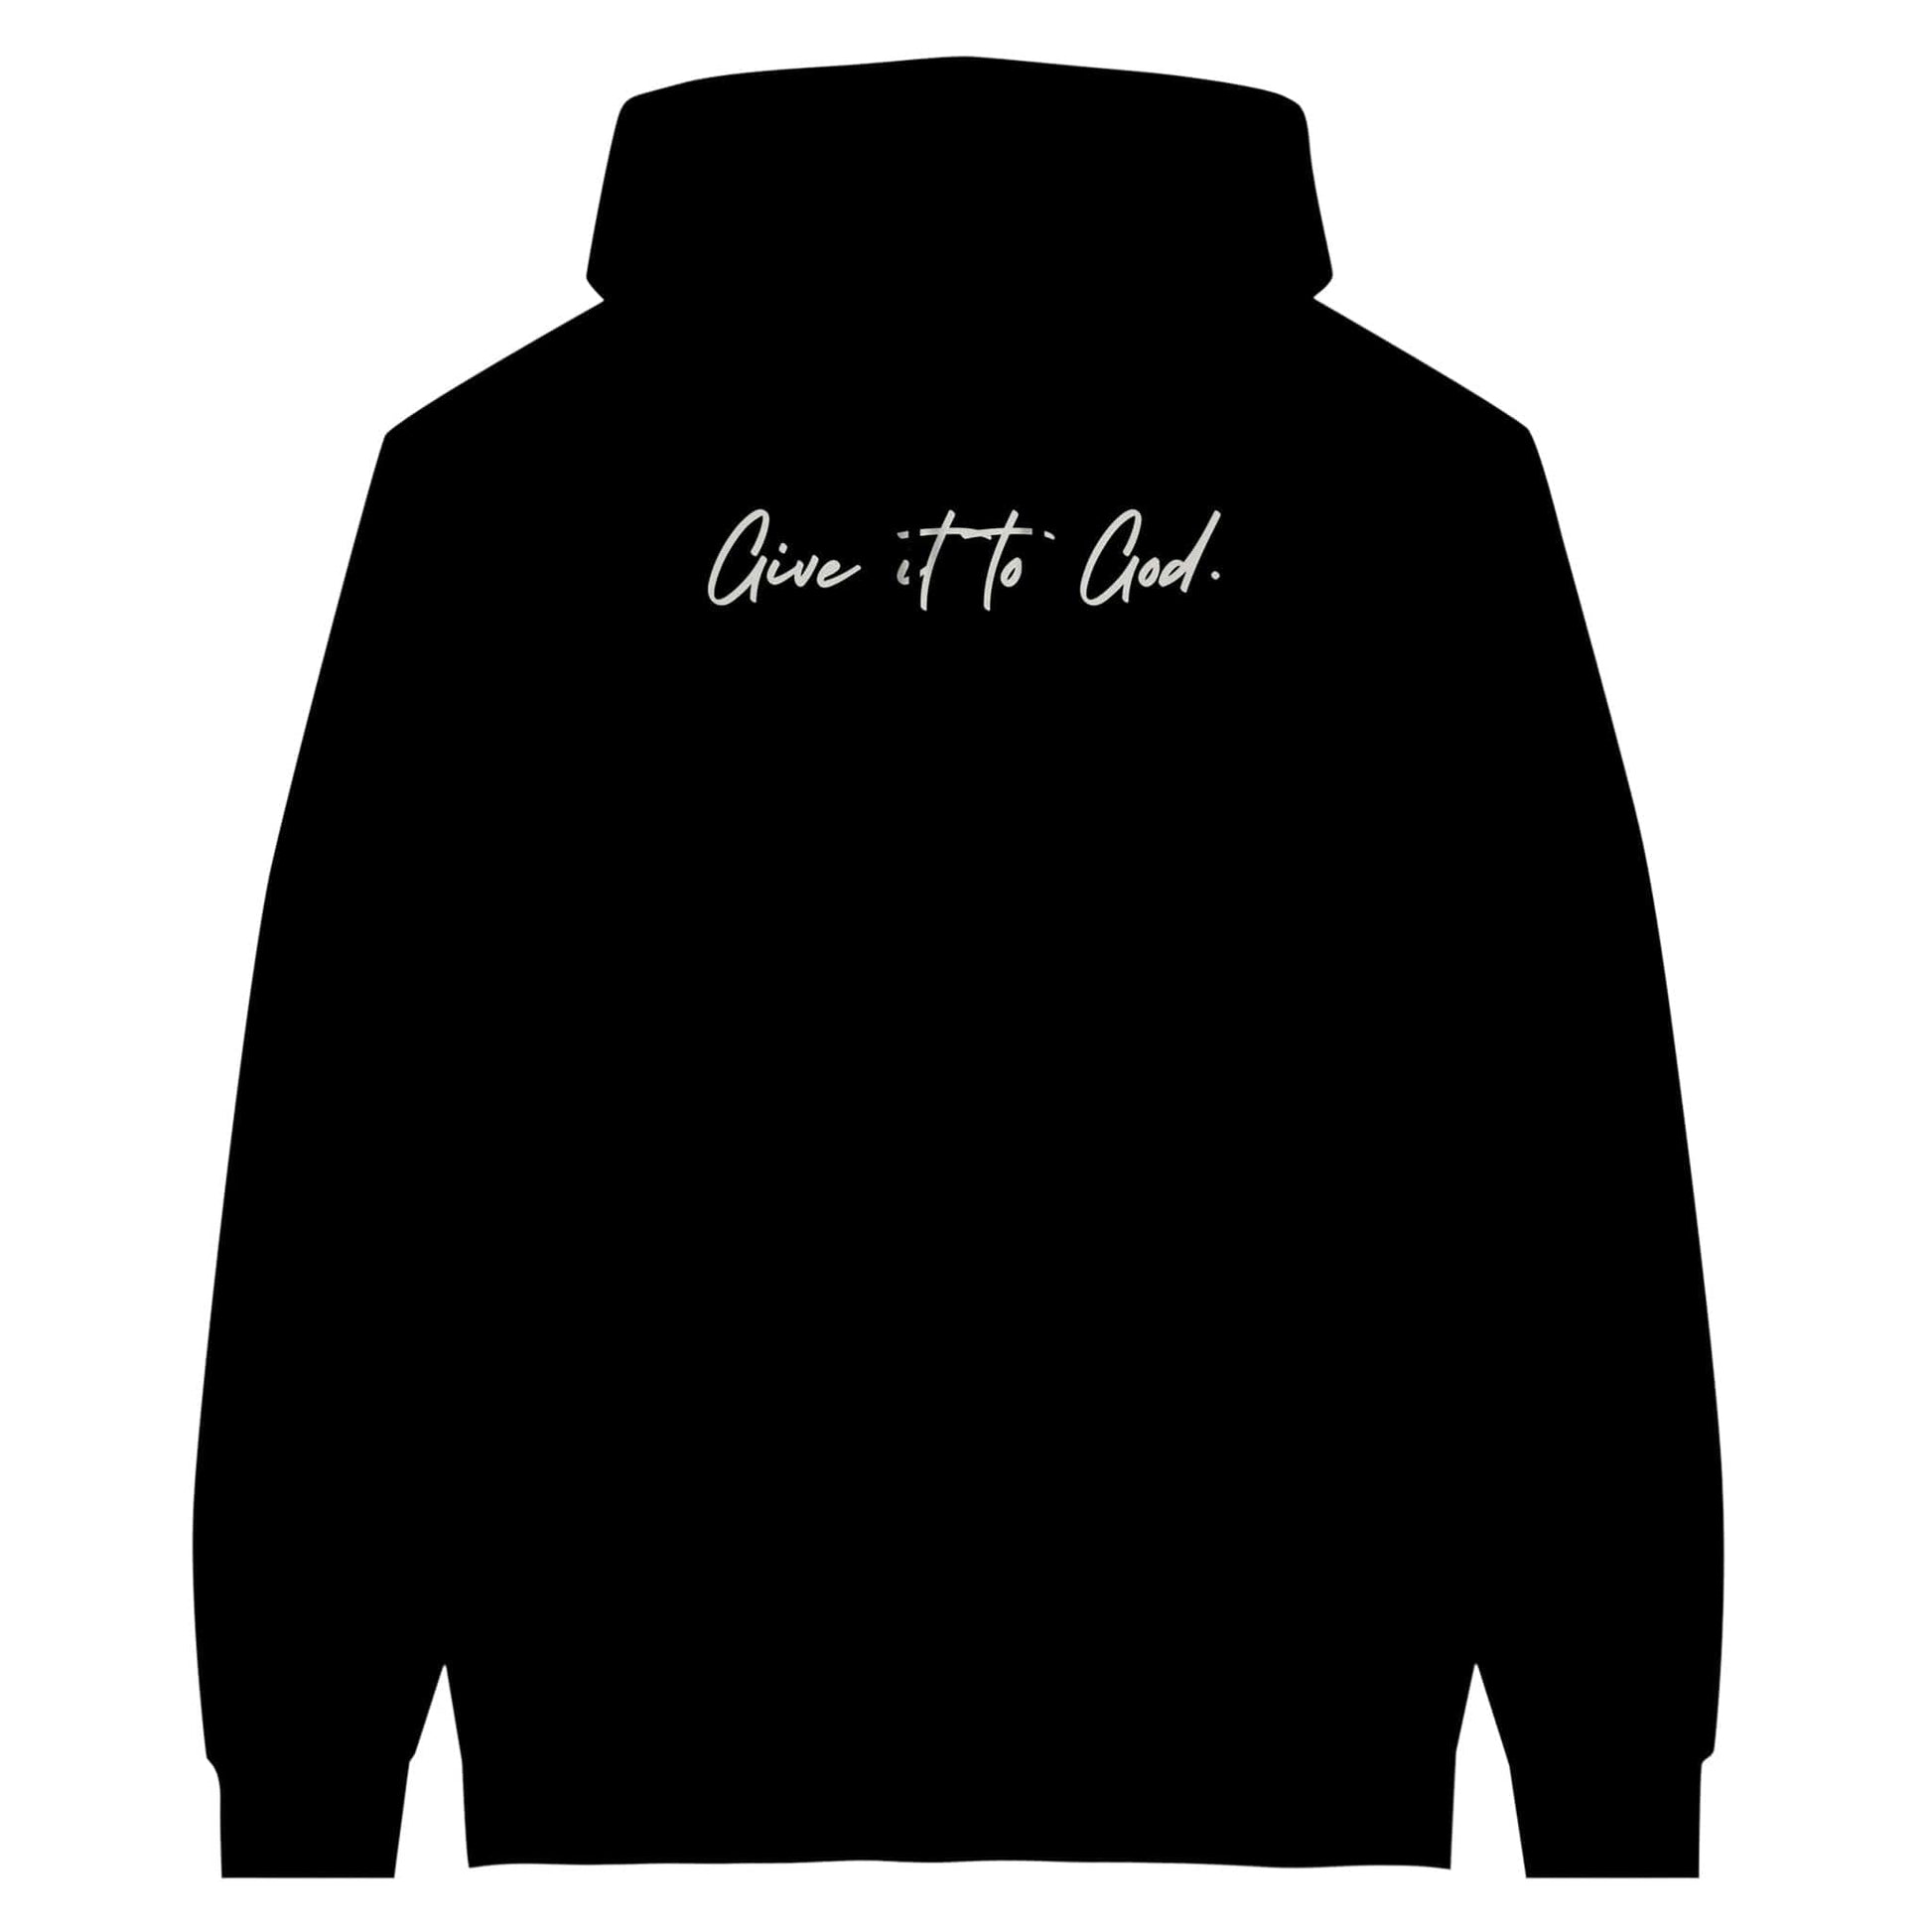 Coffee With My Father Print Material S Give it to God - Hoodie